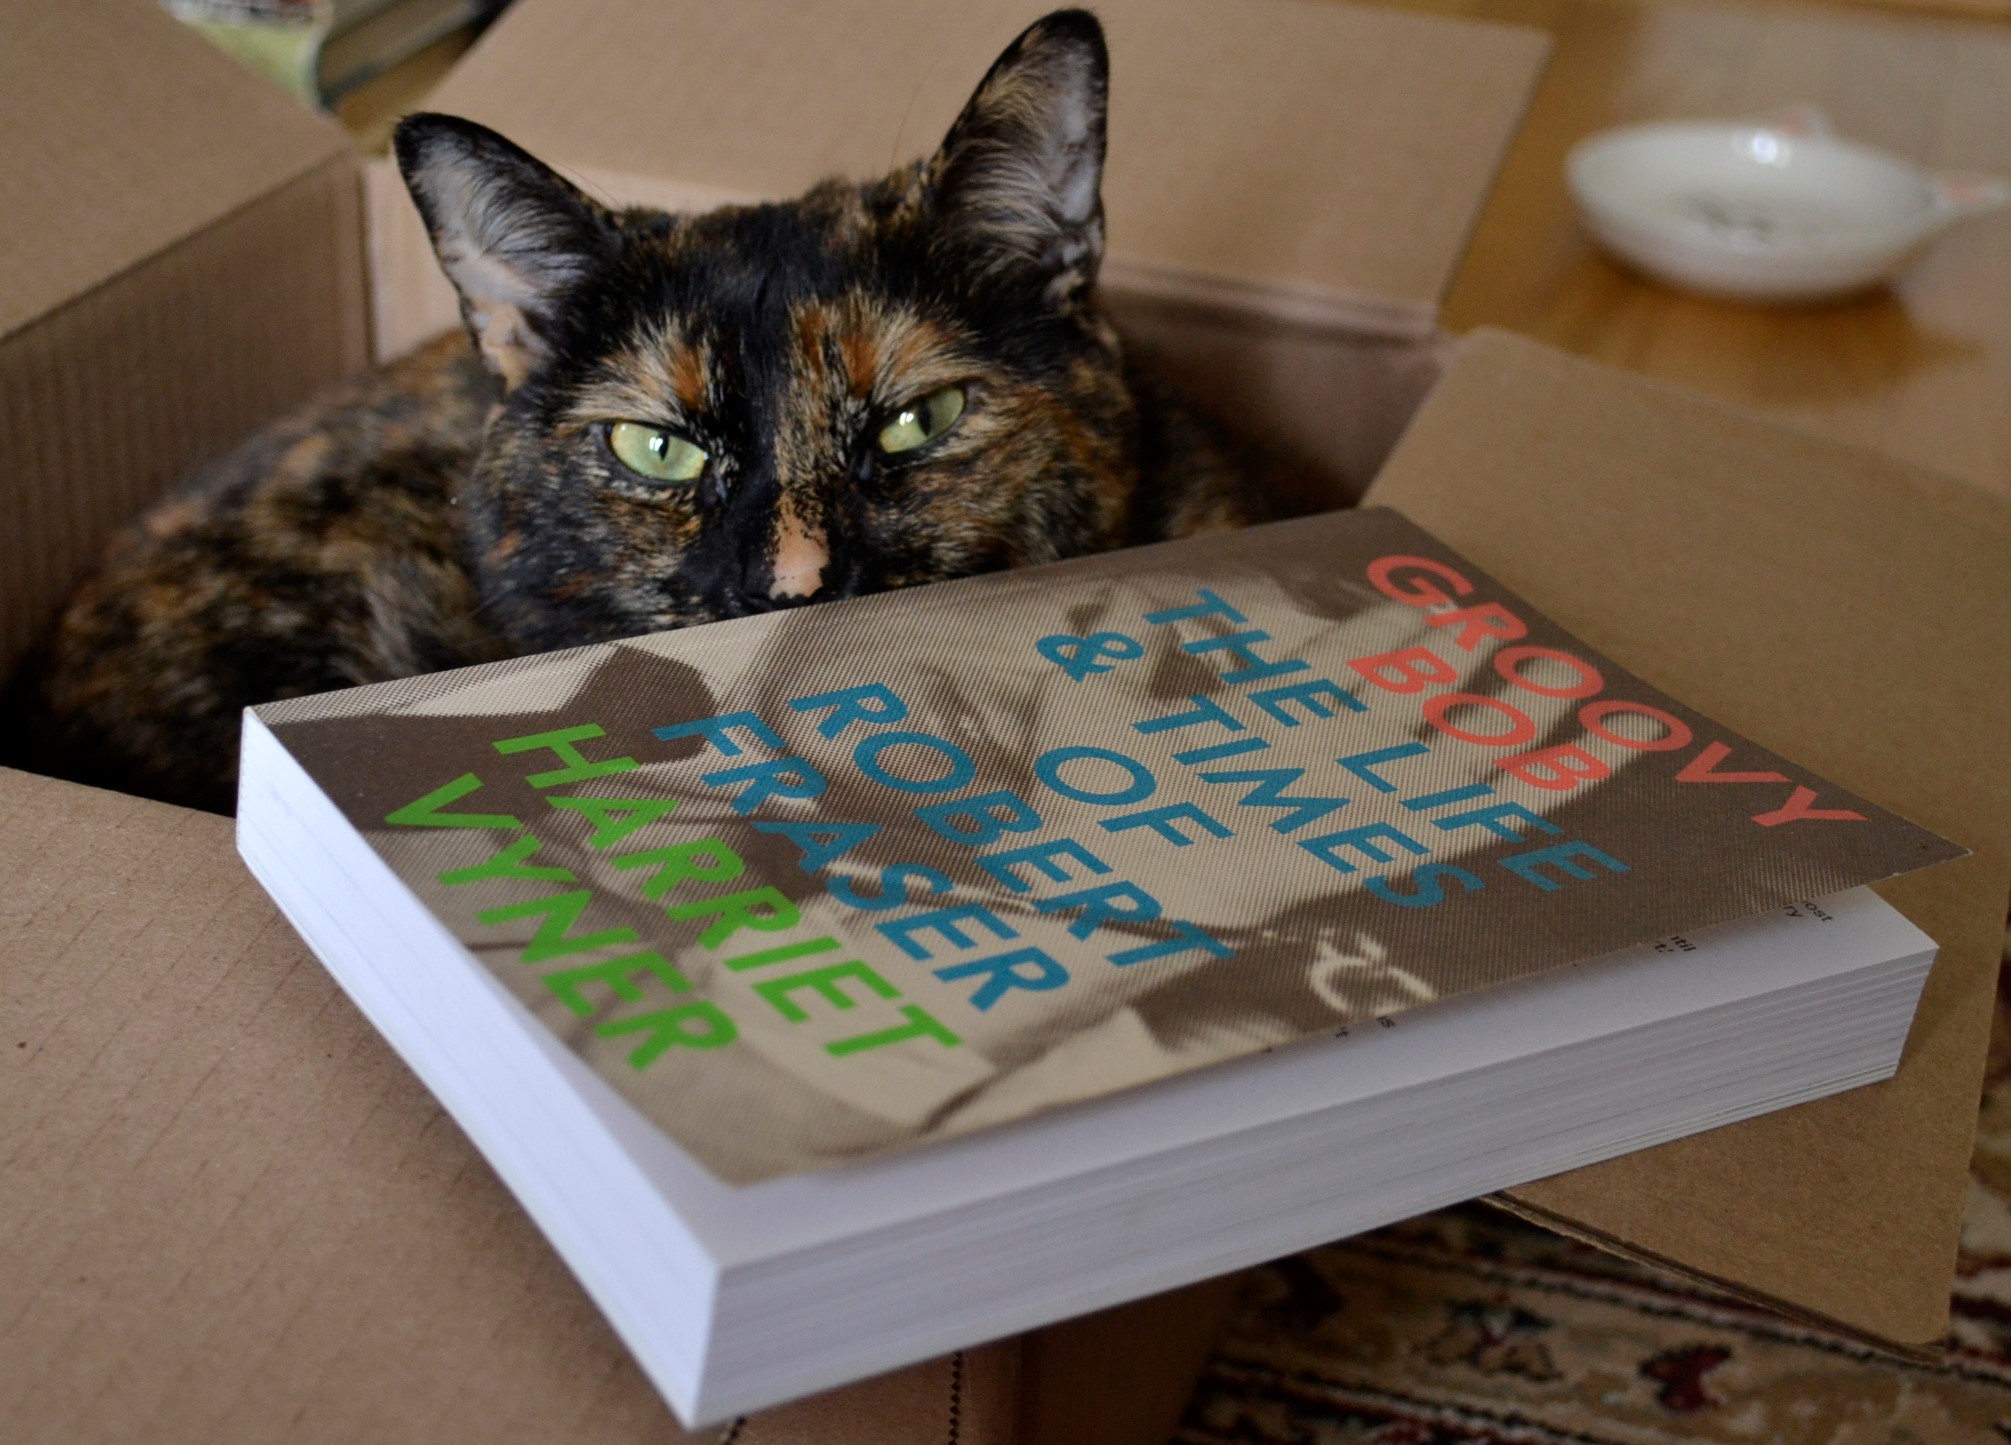 A tortie in a box glares over the edge of Groovy Bob, a book featuring neon text over a black-and-white photograph.